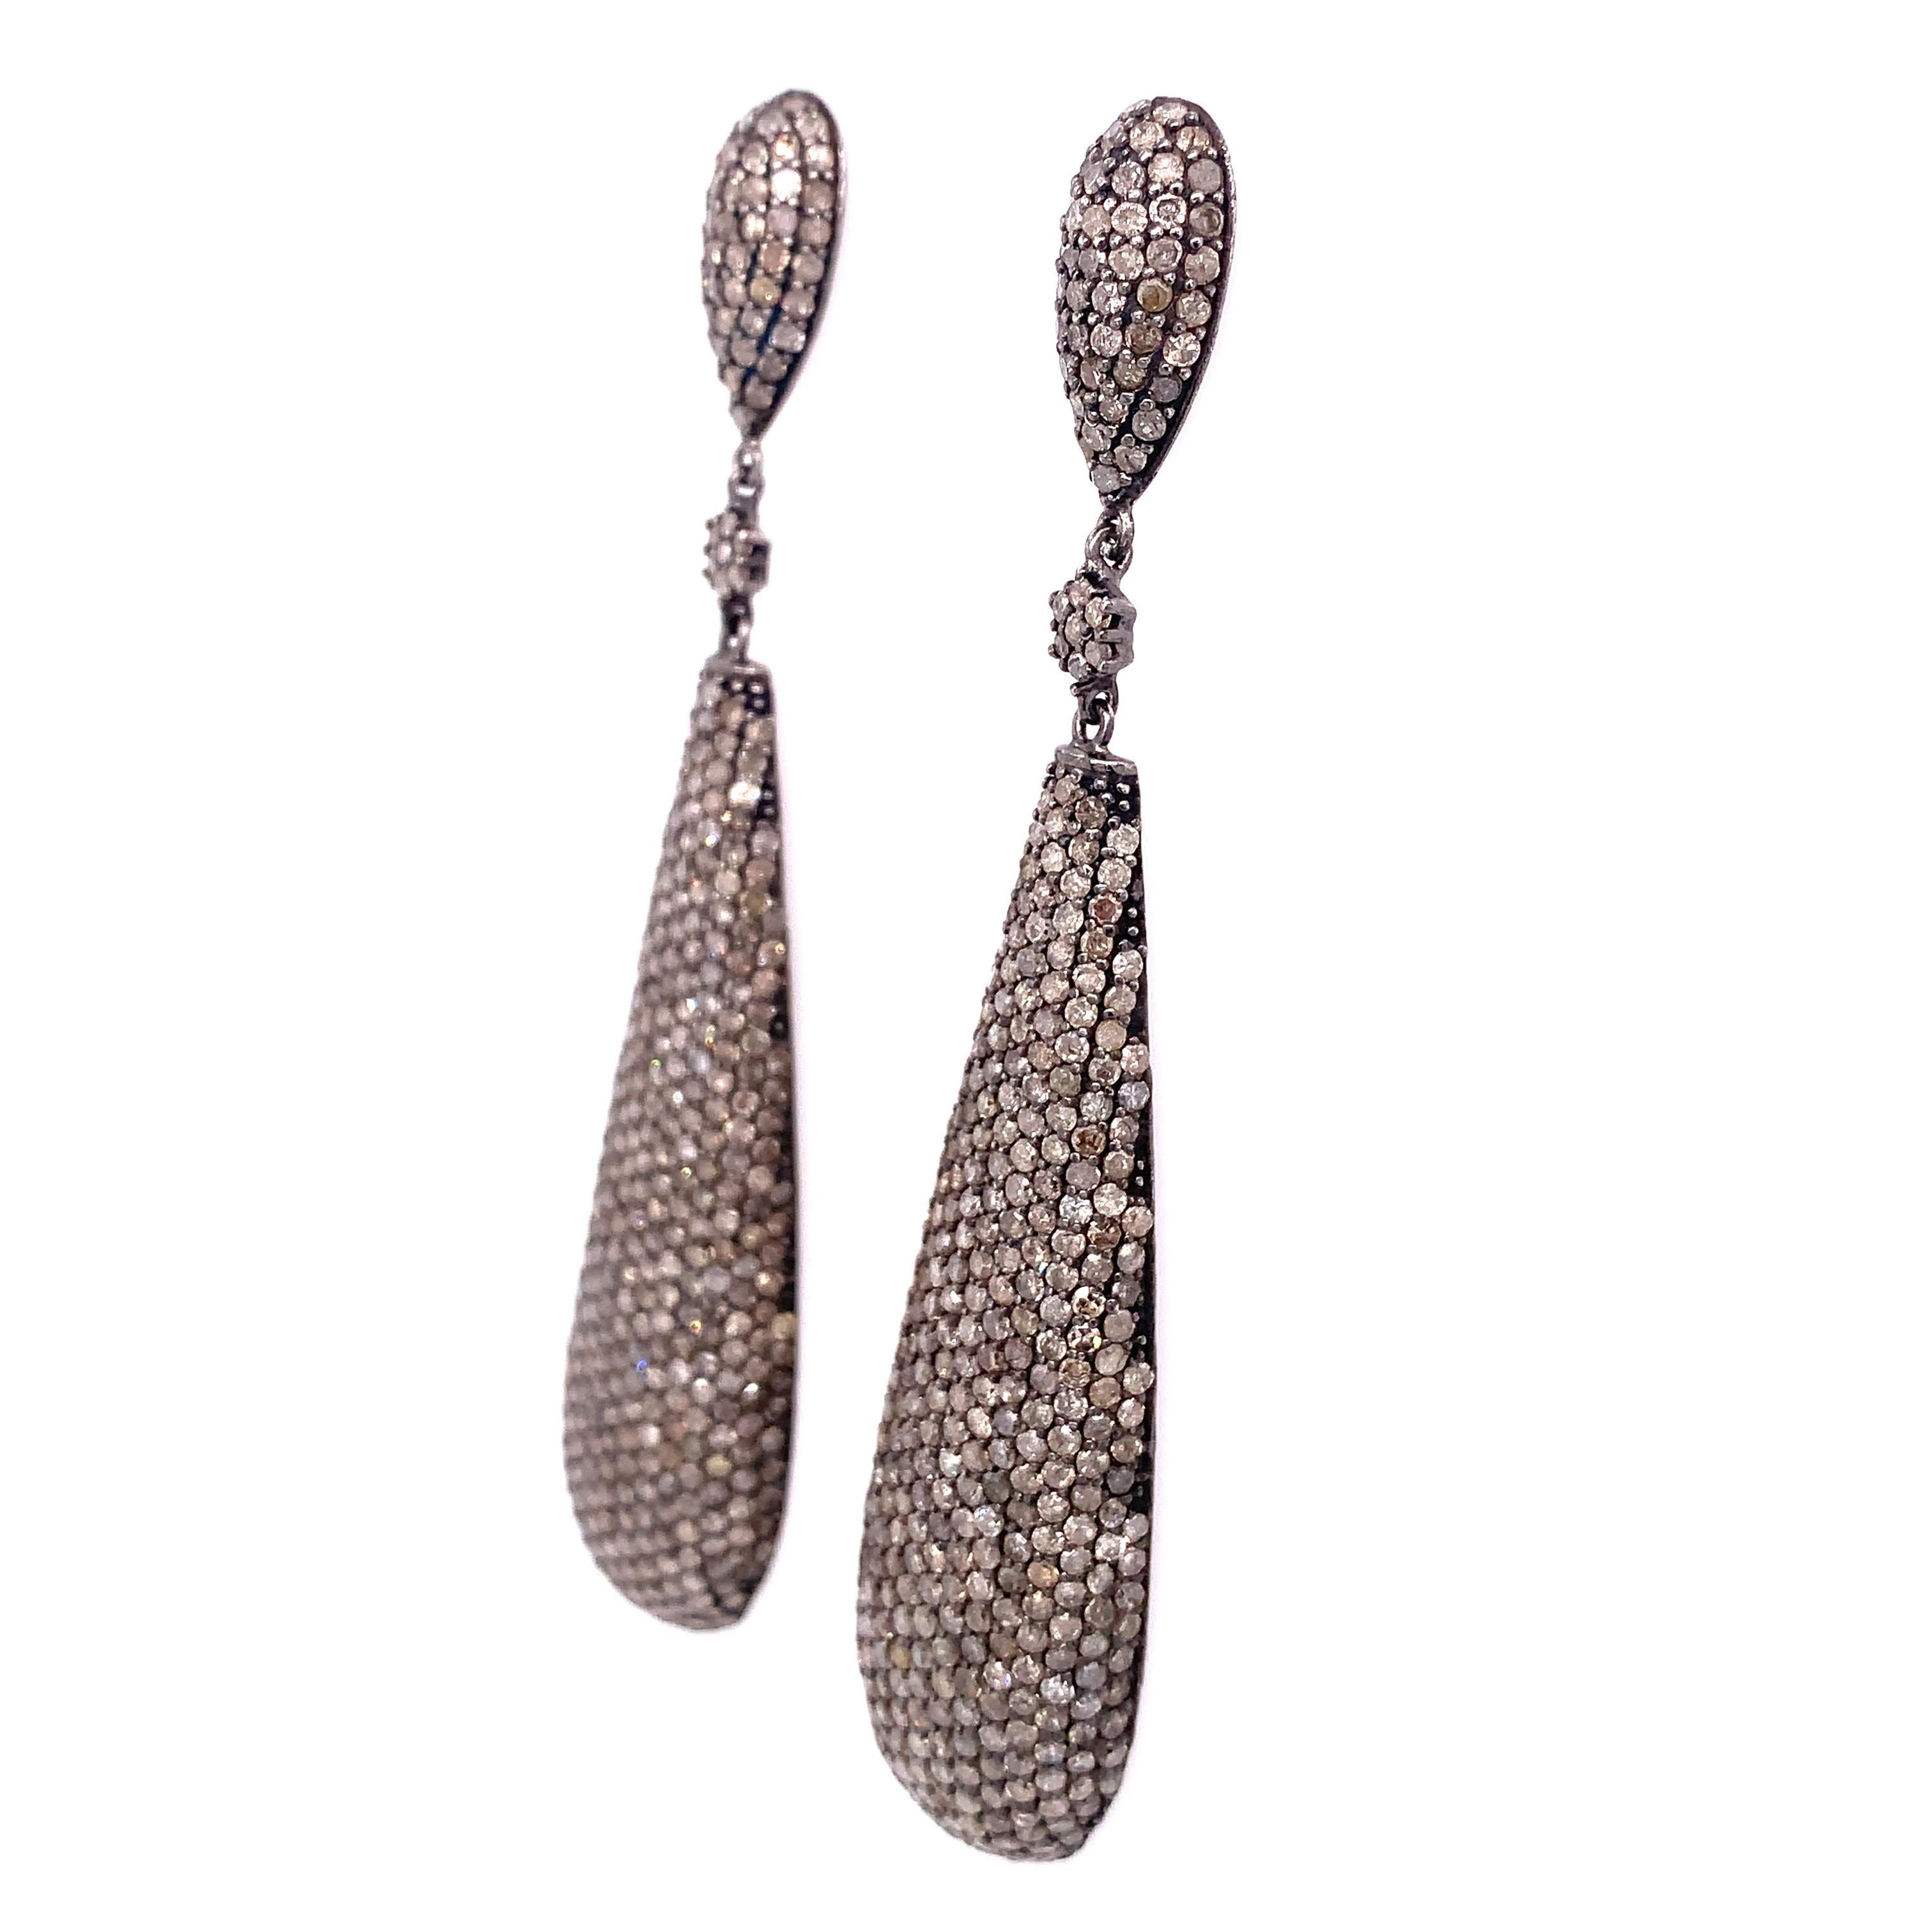 Life in color Collection

Icy brownish Diamond pave pebble elongated earrings set in sterling silver.

Diamond: 11.91ct total weight.
